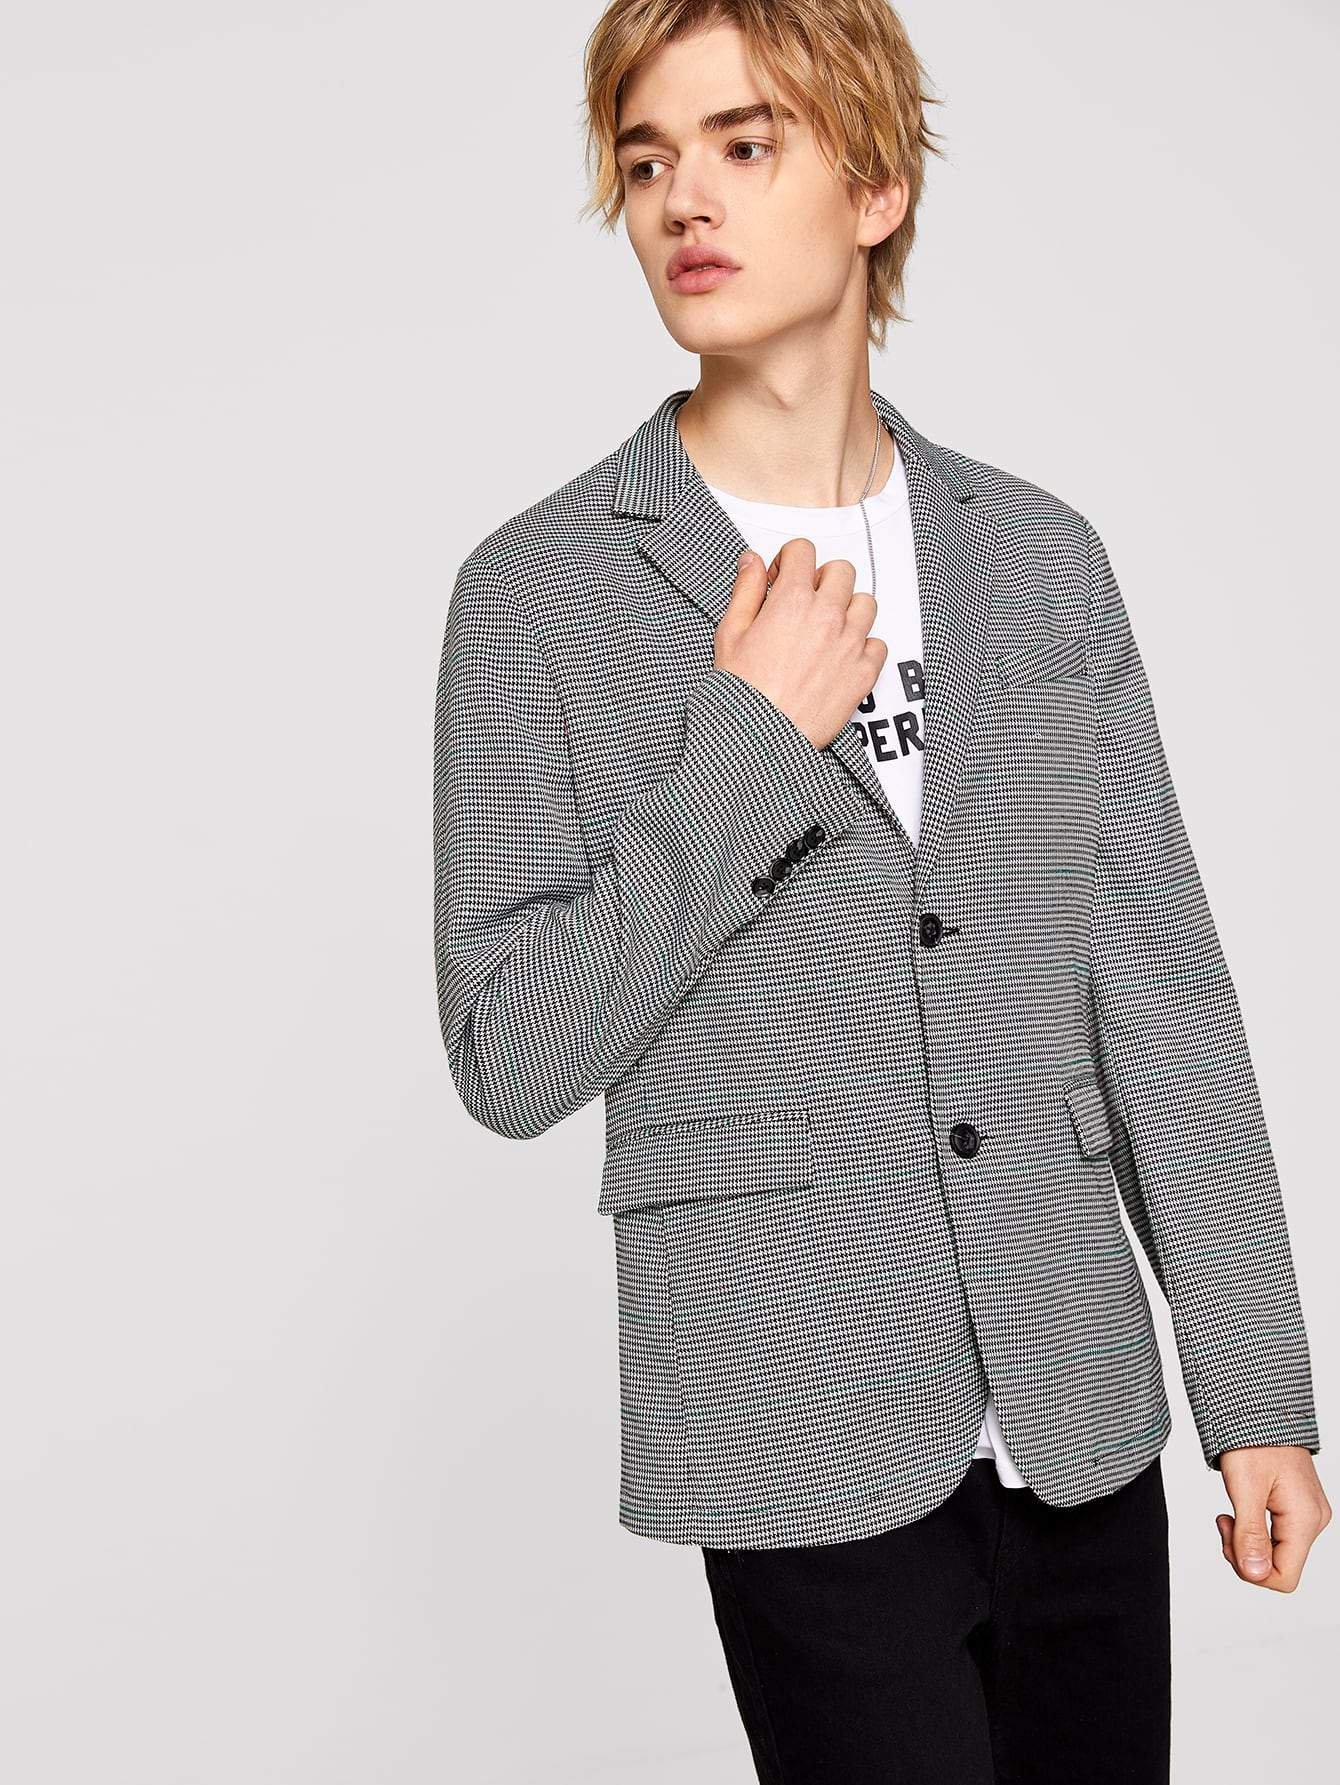 Black and White Single Breasted Notch Collar Houndstooth Blazer